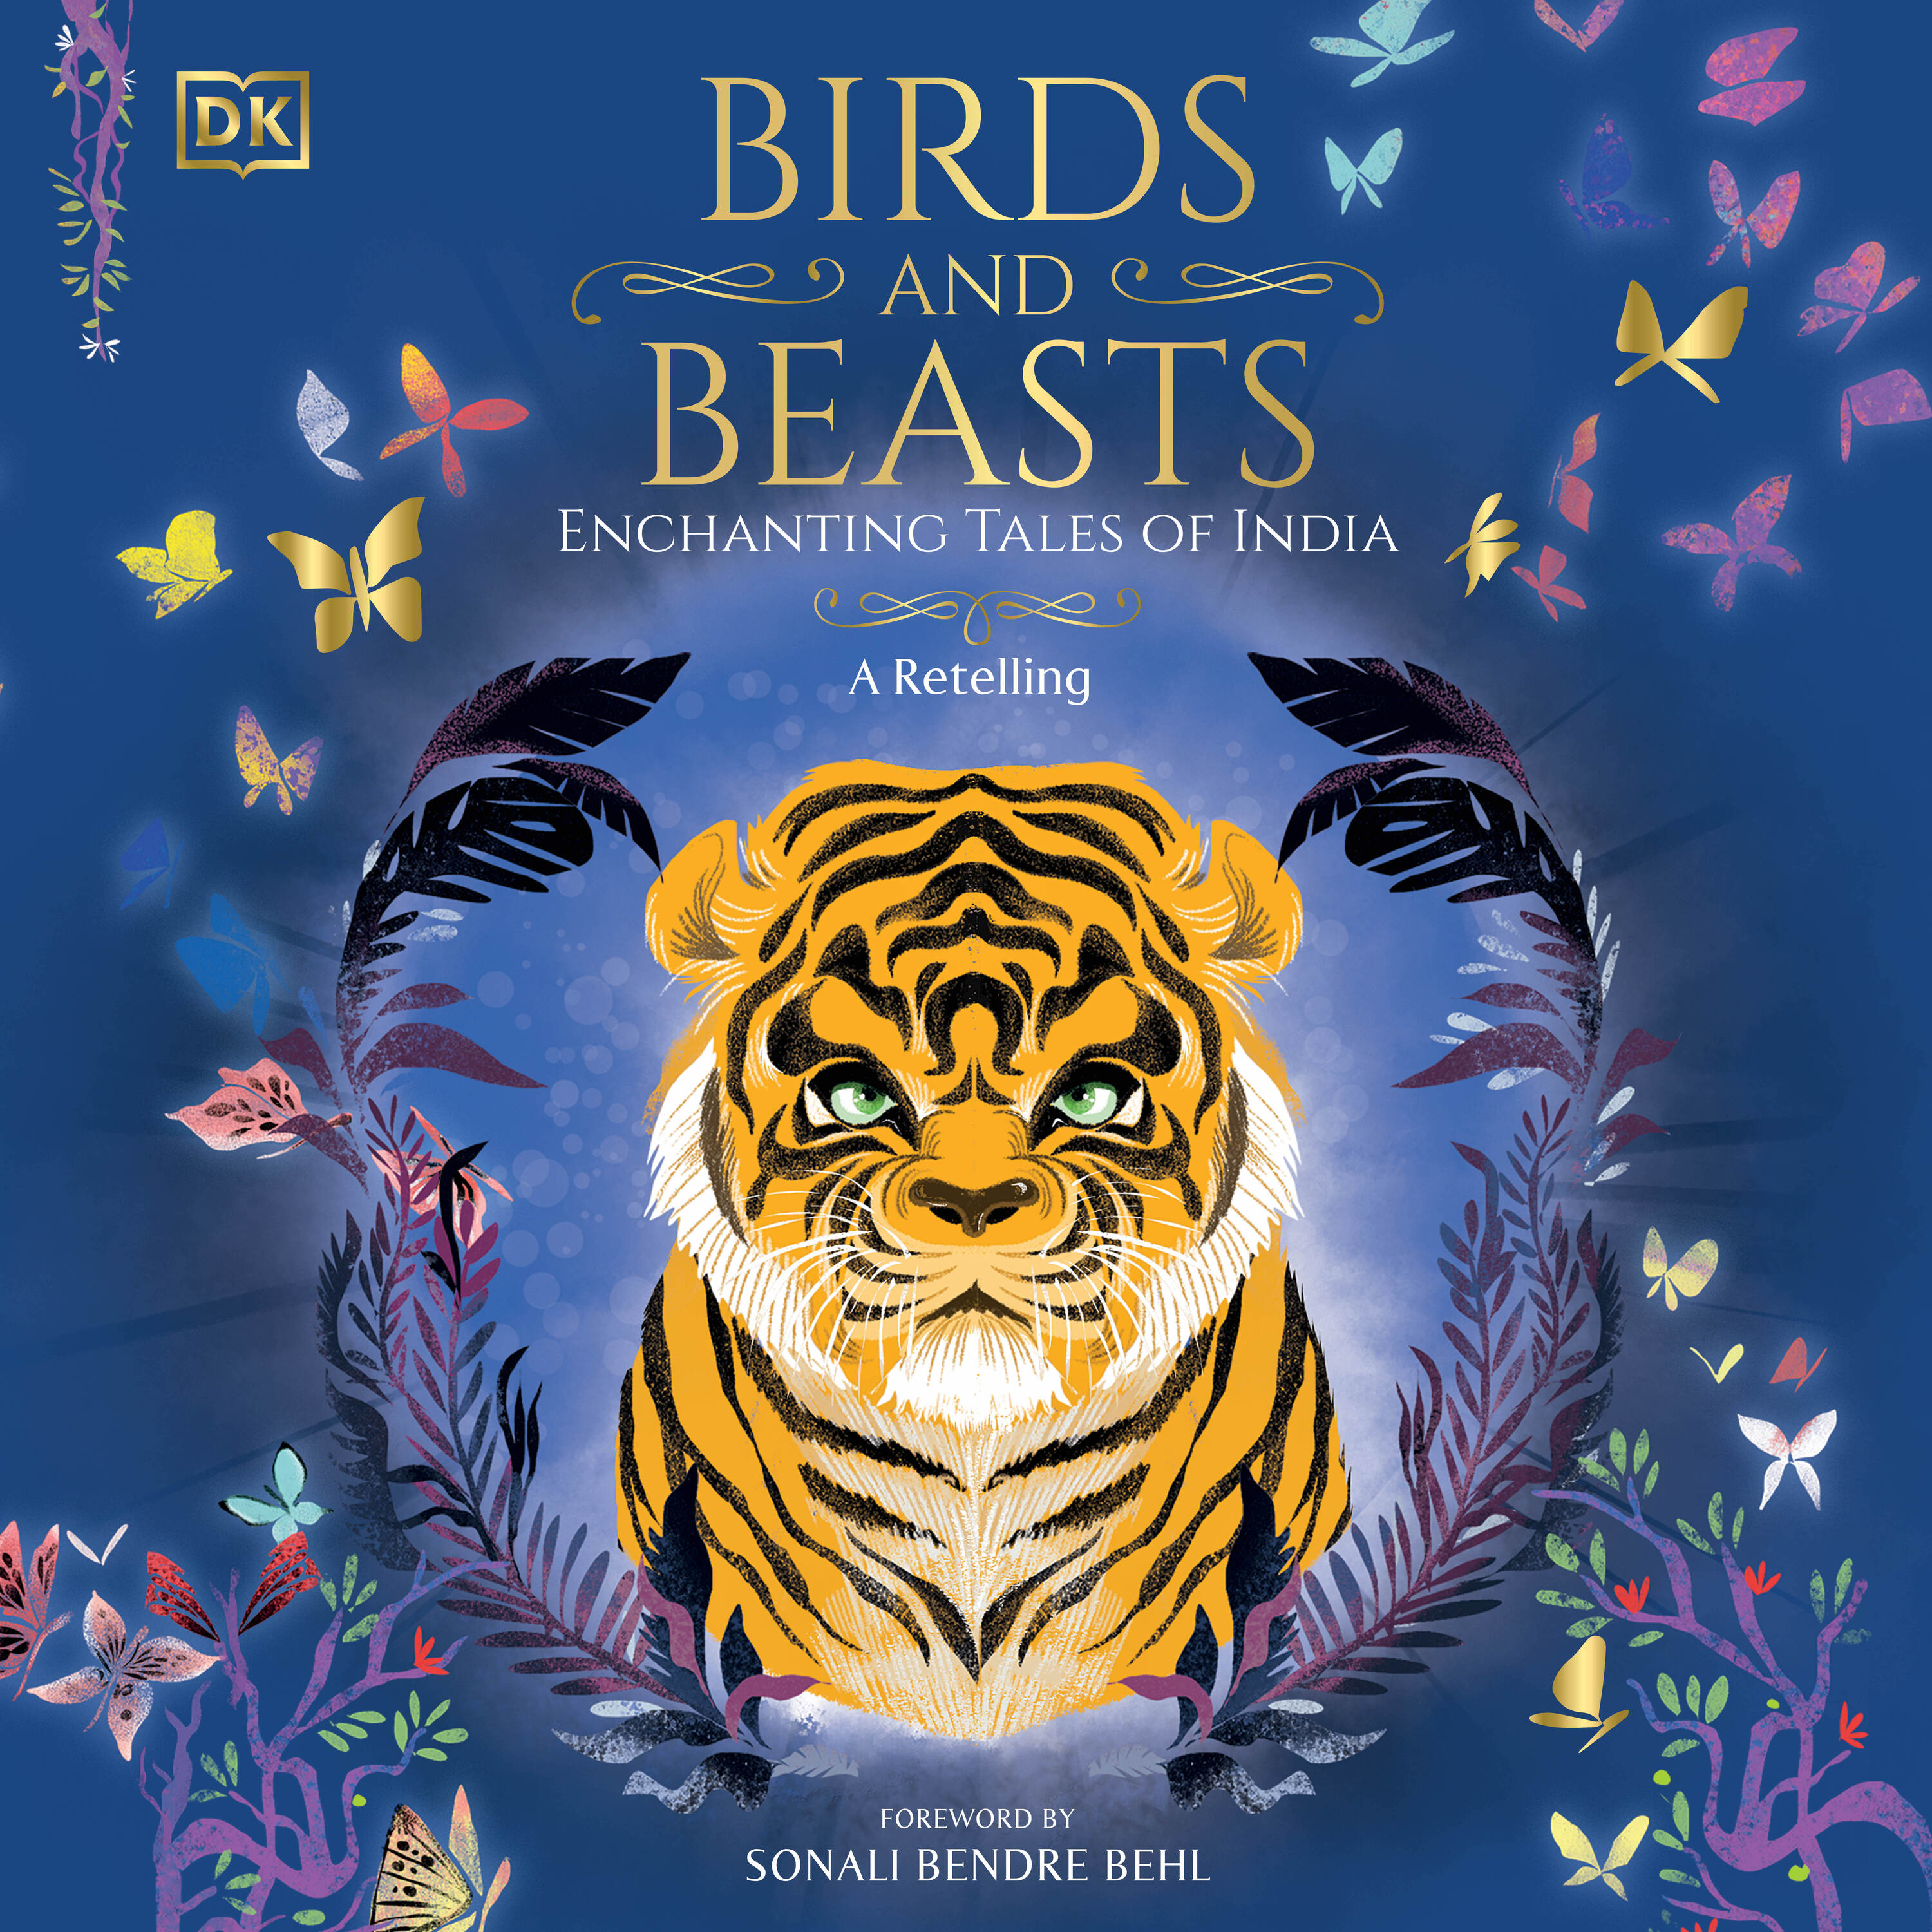 Mythology, Magic and Folklore article - Birds and Beasts audiobook cover